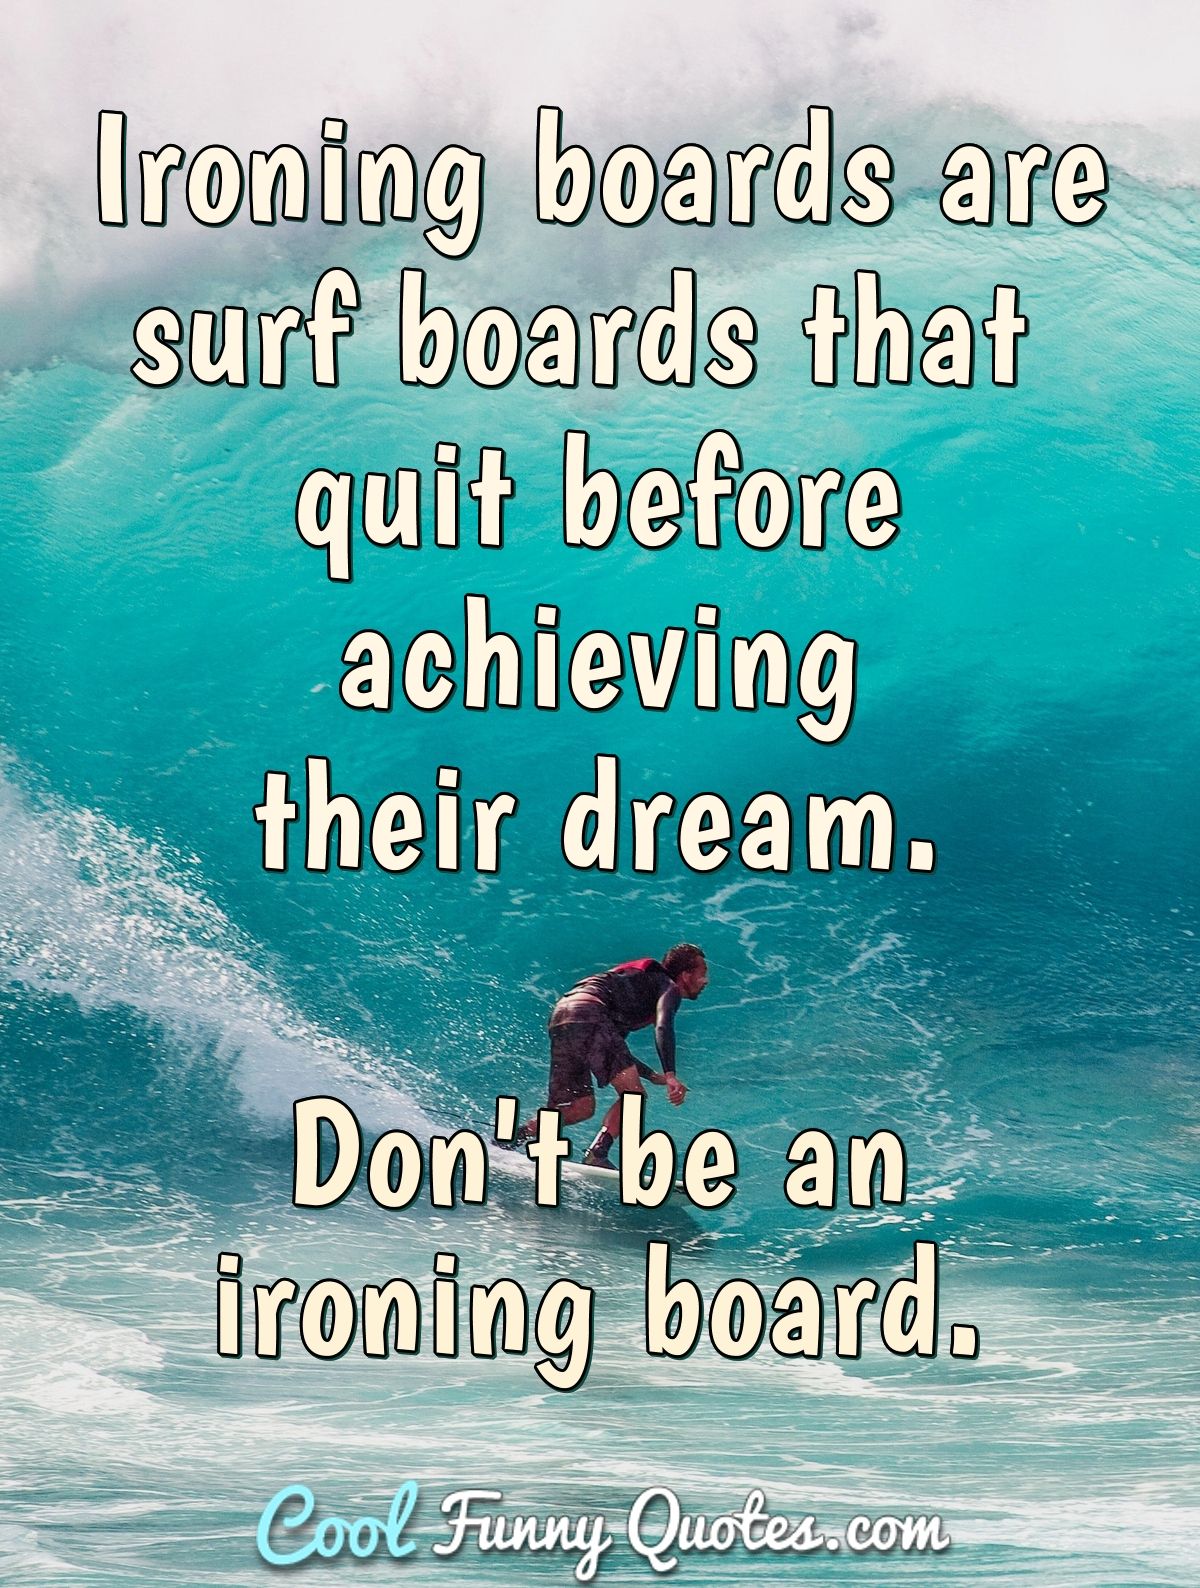 Ironing boards are surf boards that quit before achieving their dream